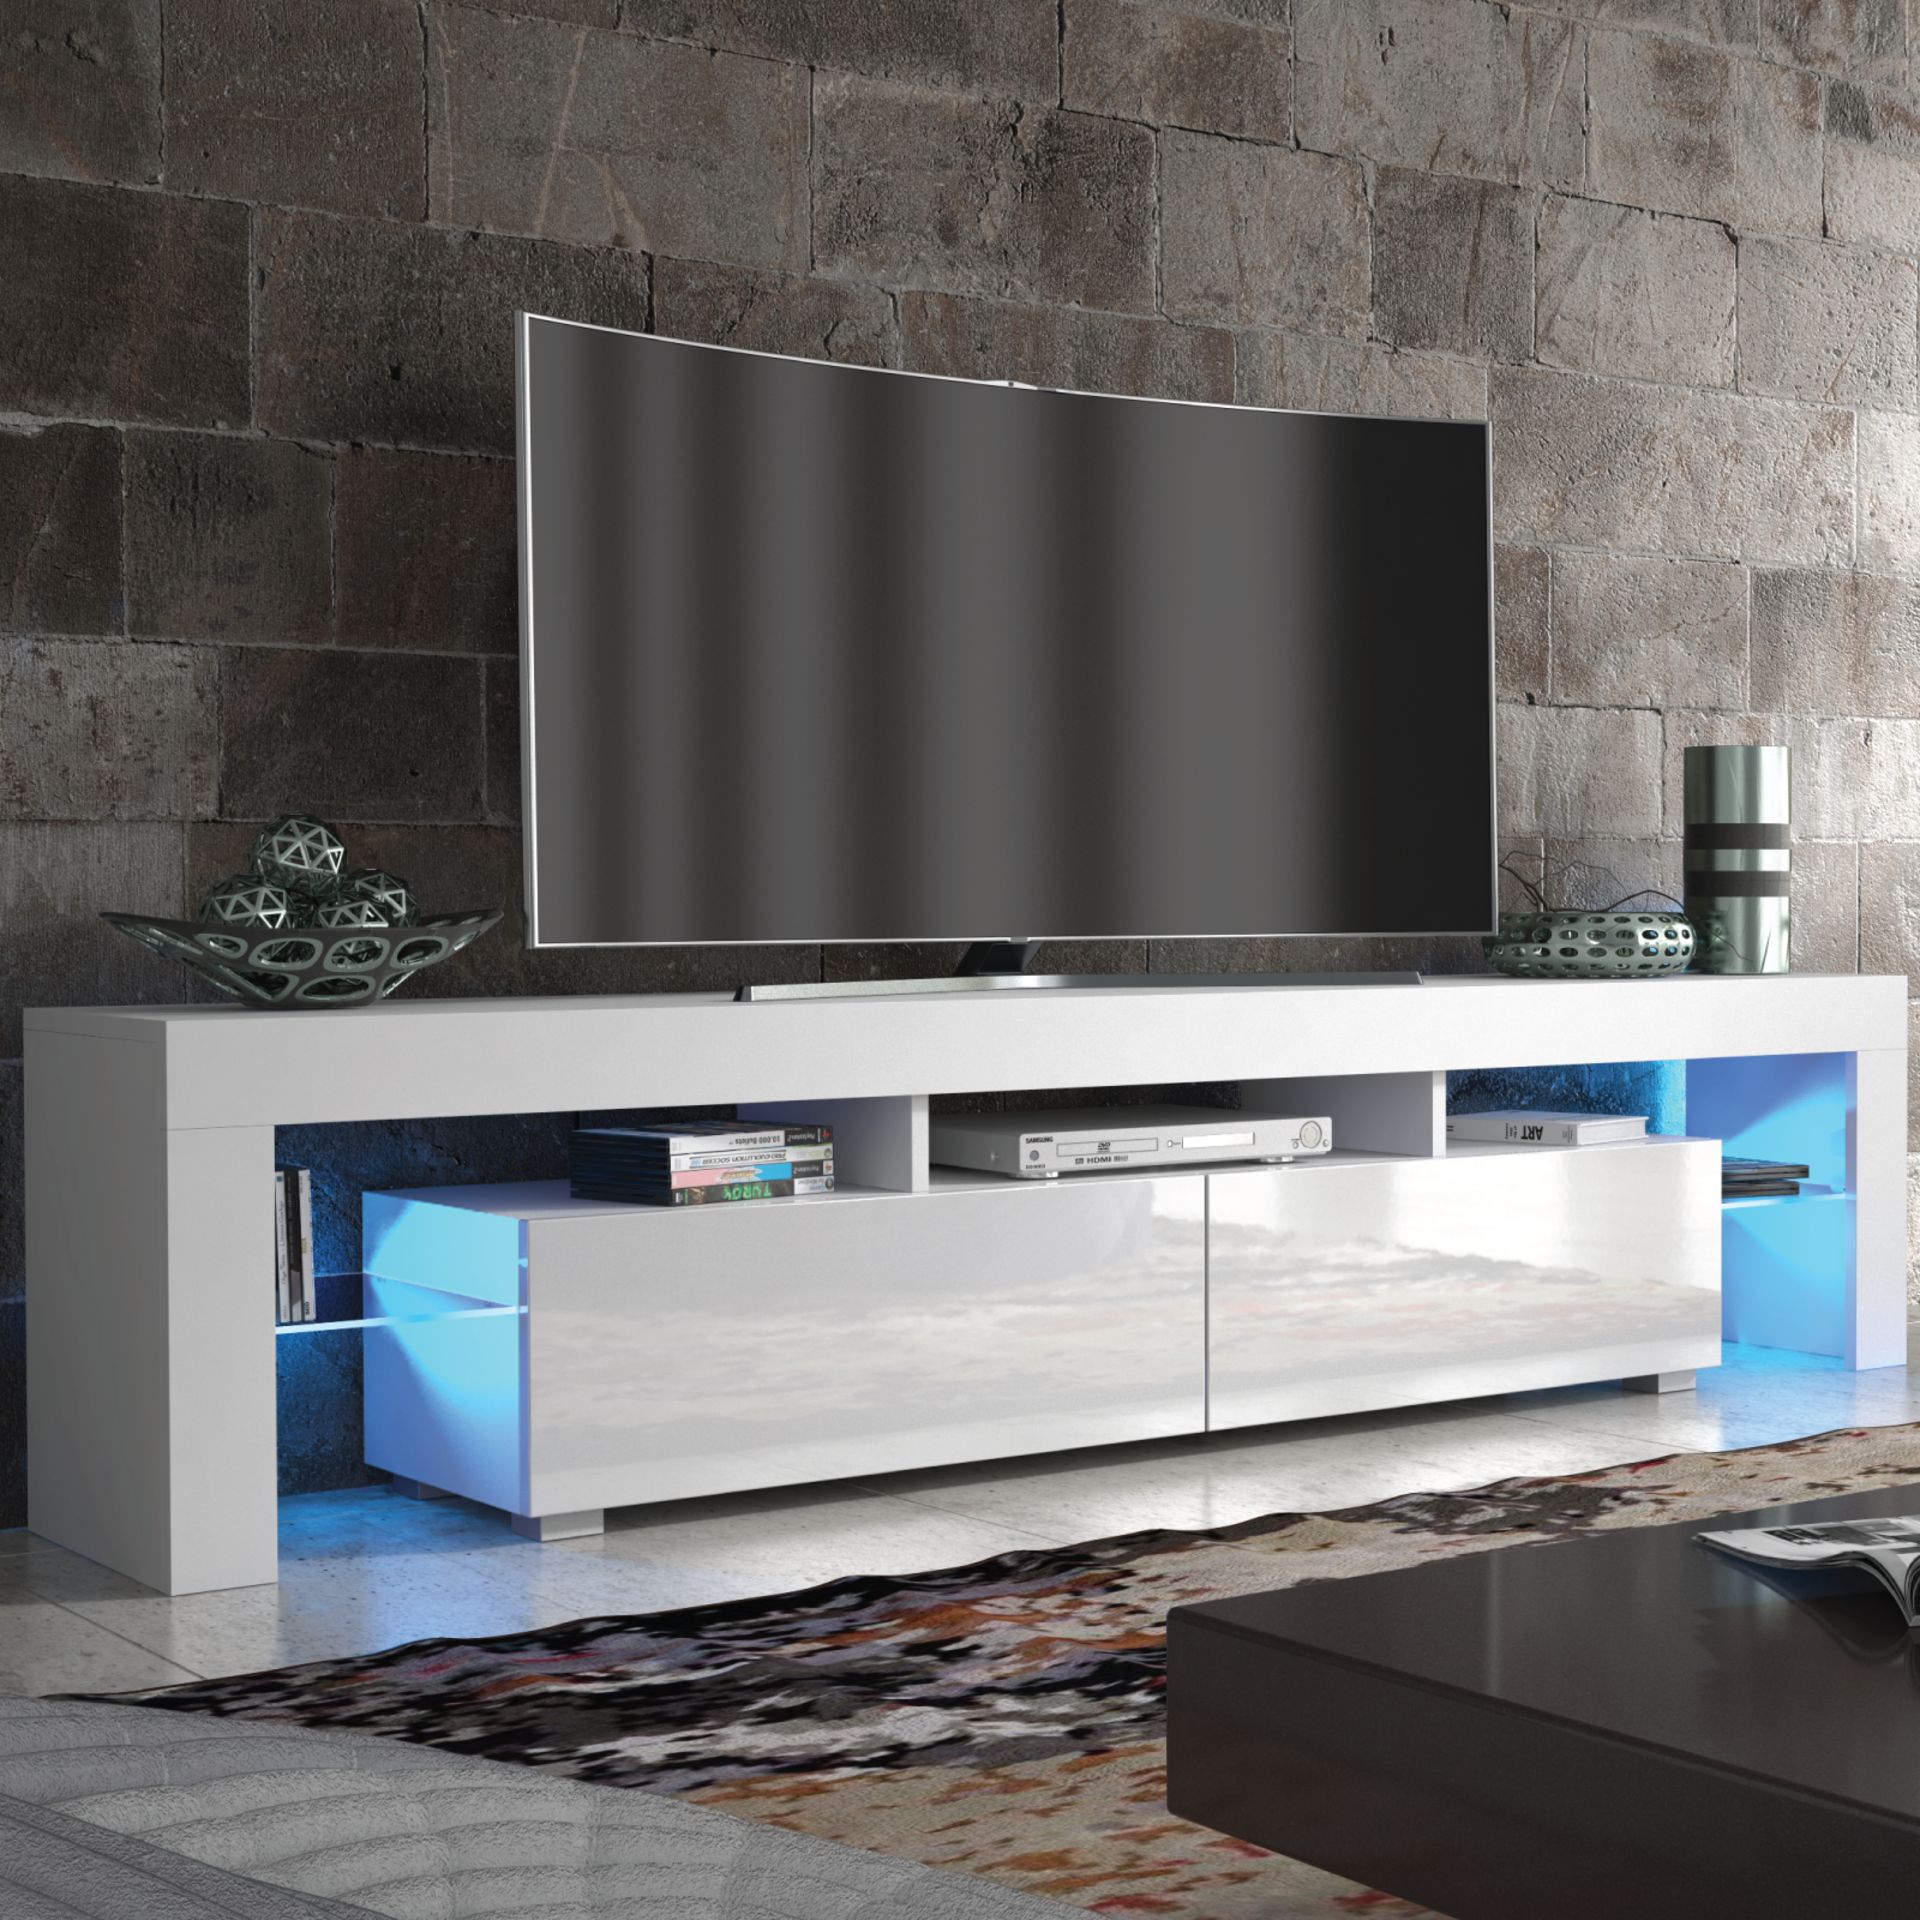 MODERN 160CM TV UNIT CABINET TV STAND HIGH GLOSS DOORS WITH LED LIGHTS